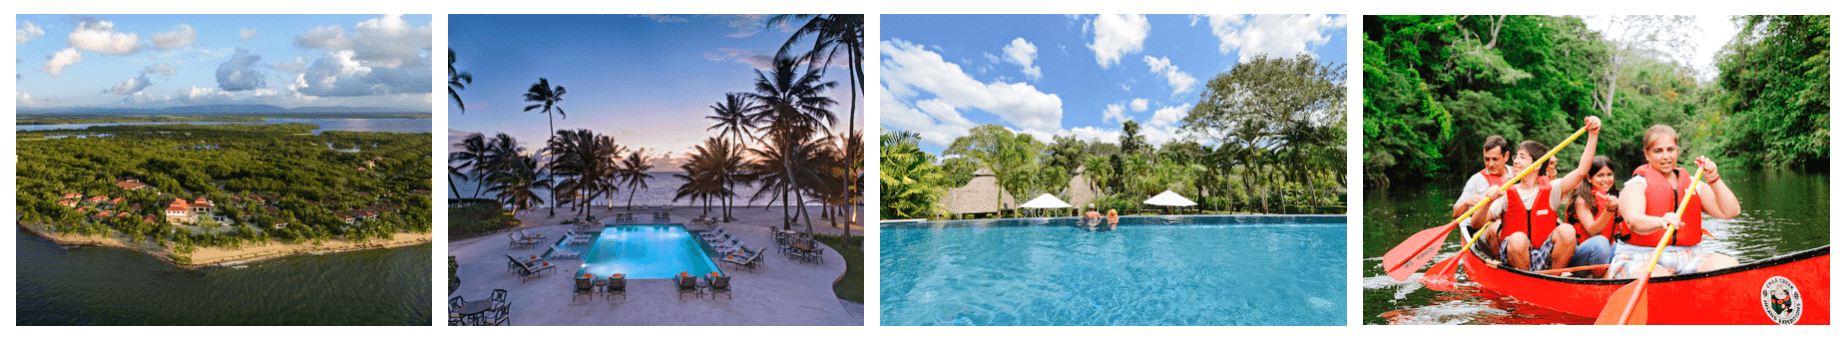 Discover the Best of Belize Through A New Collection of Luxury Resorts